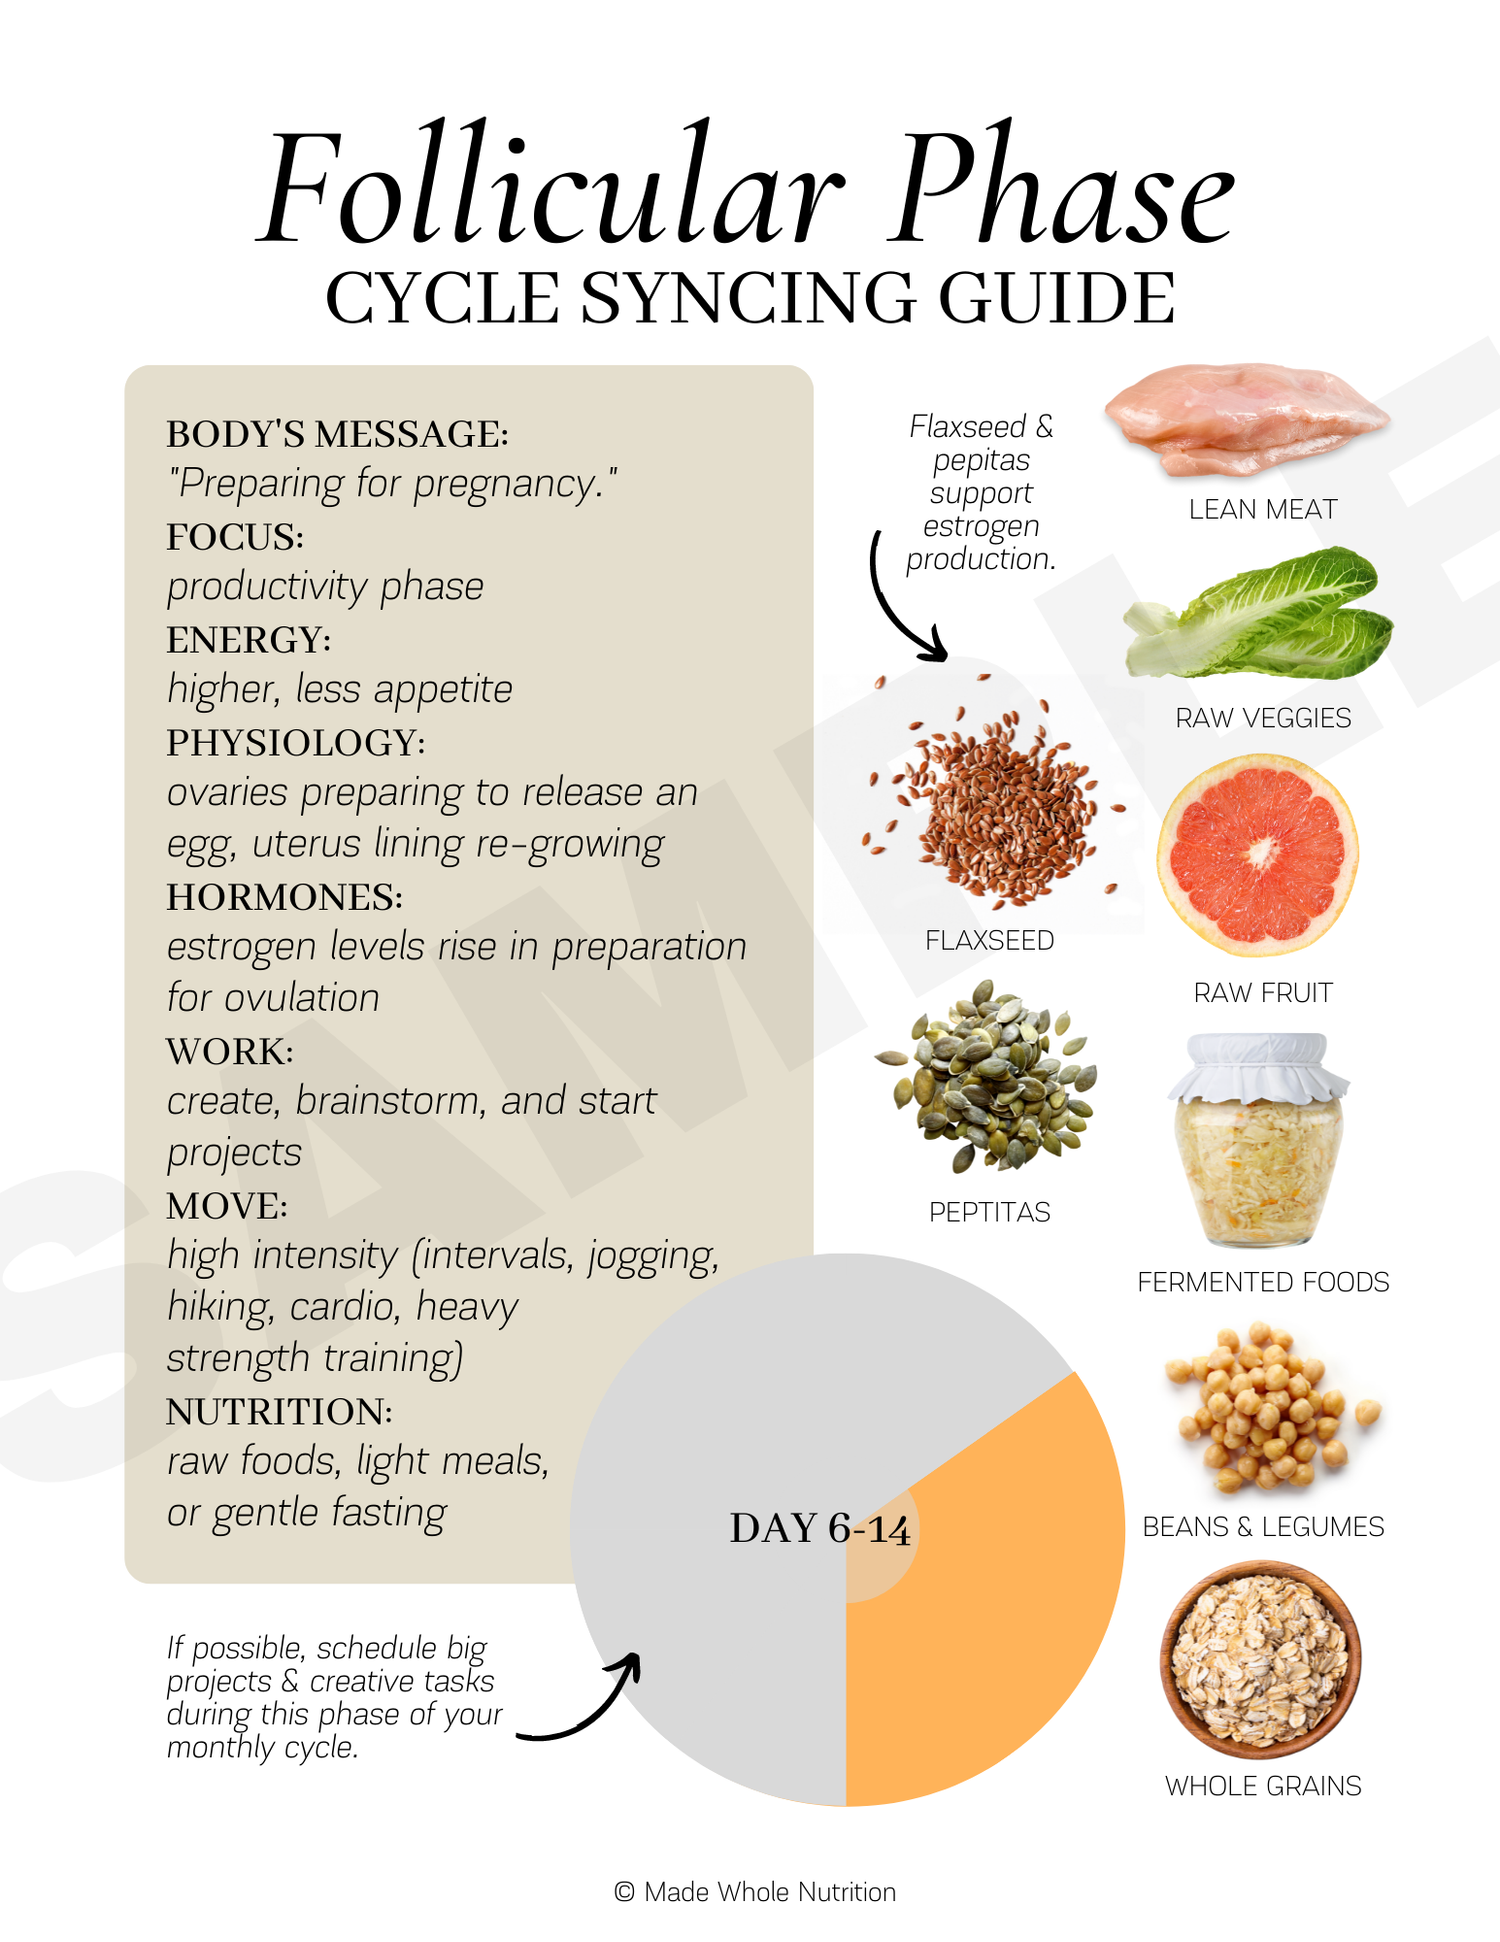 Cycle Syncing Guides (handout bundle) — Functional Health Research